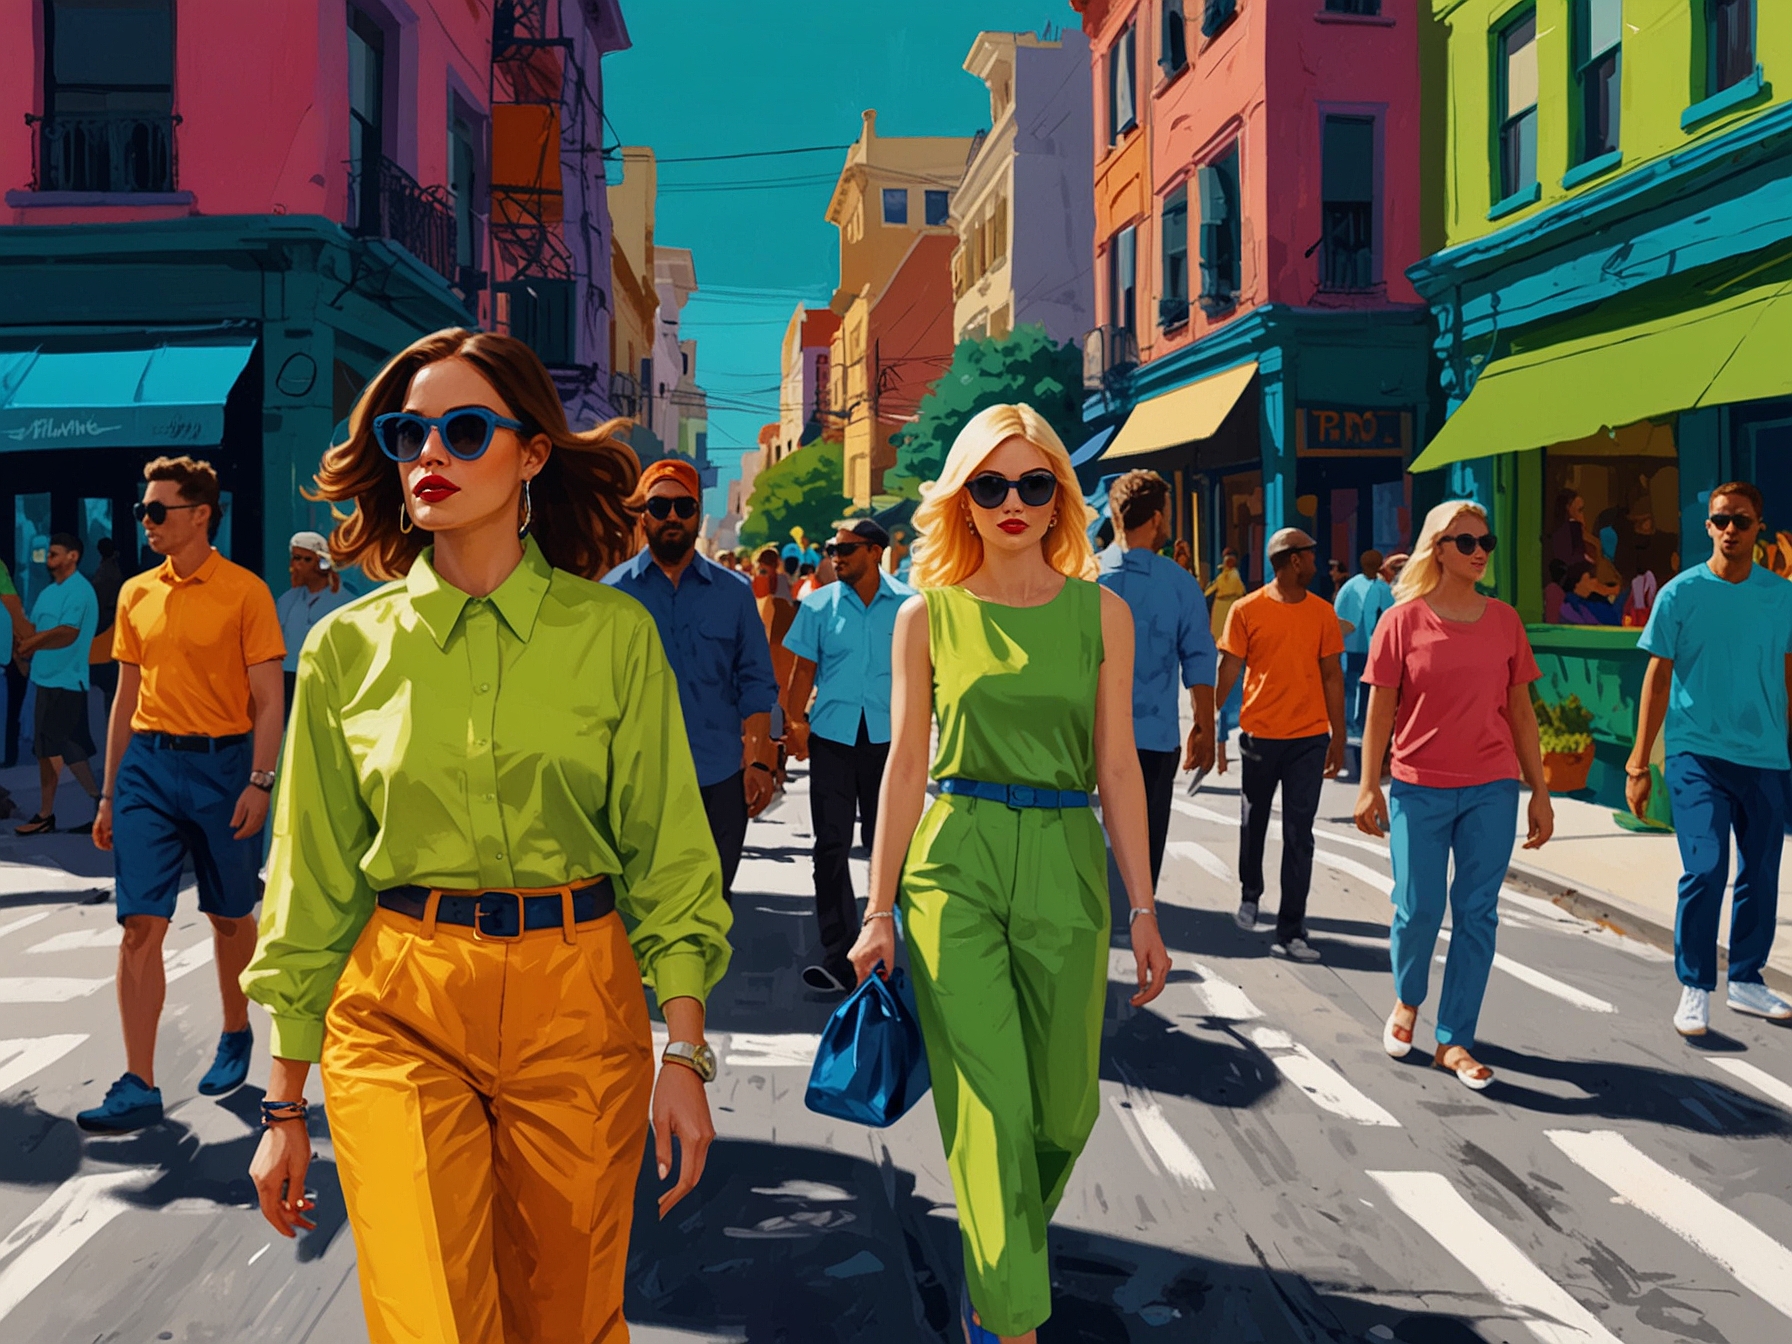 A vibrant street scene featuring individuals in colorful outfits, including neon greens and electric blues, highlighting the trend of bold hues in modern fashion.